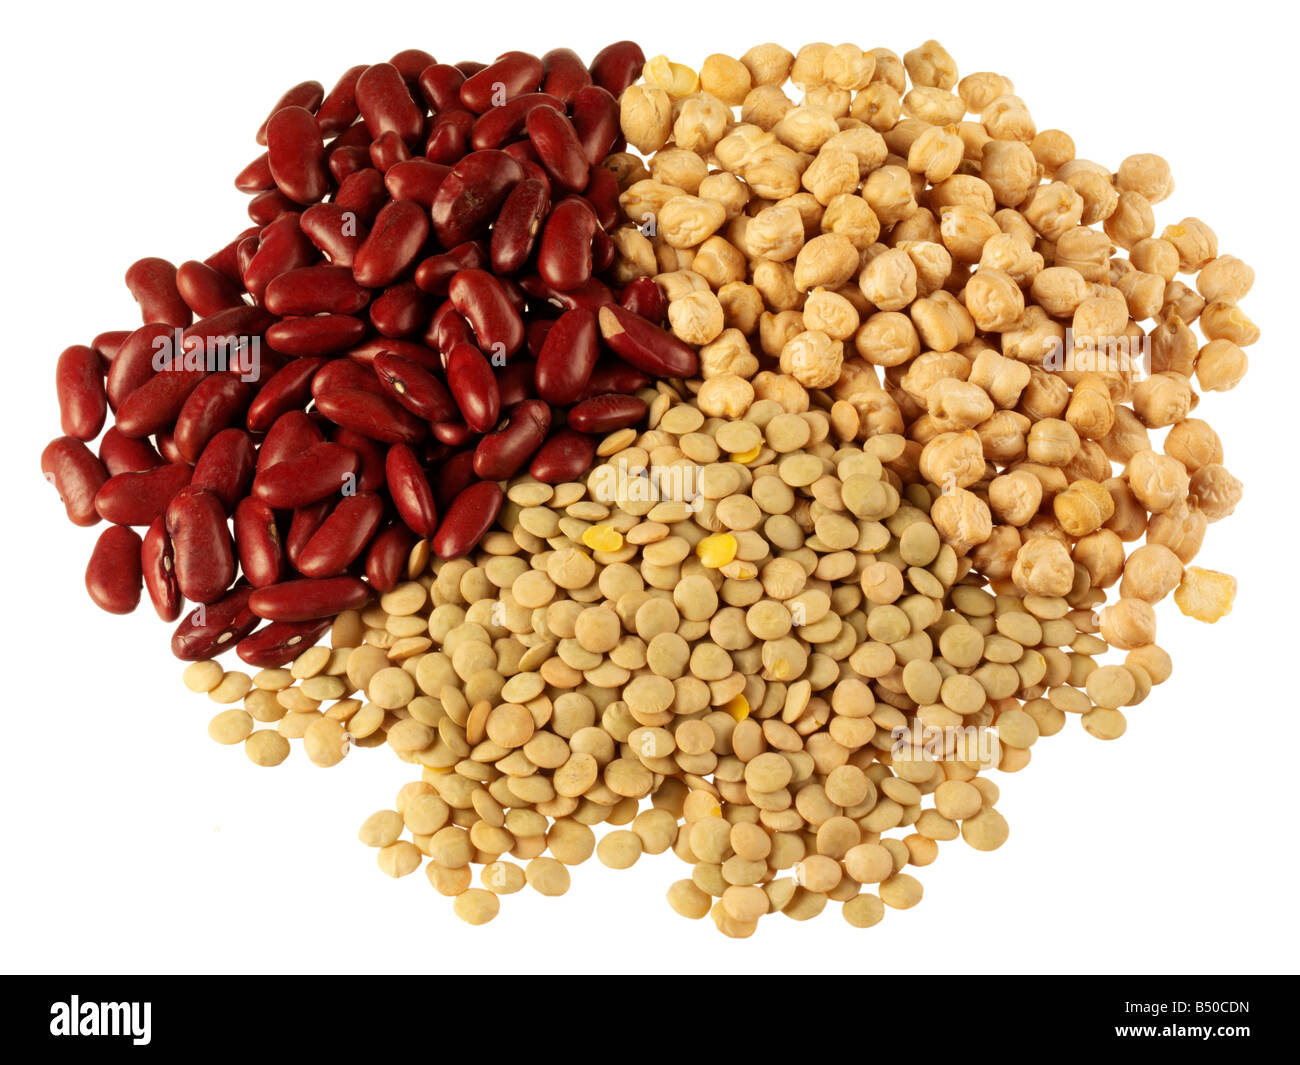 MIXED PULSES;GREEN LENTILS, RED KIDNEY BEANS AND CHICKPEAS Stock Photo